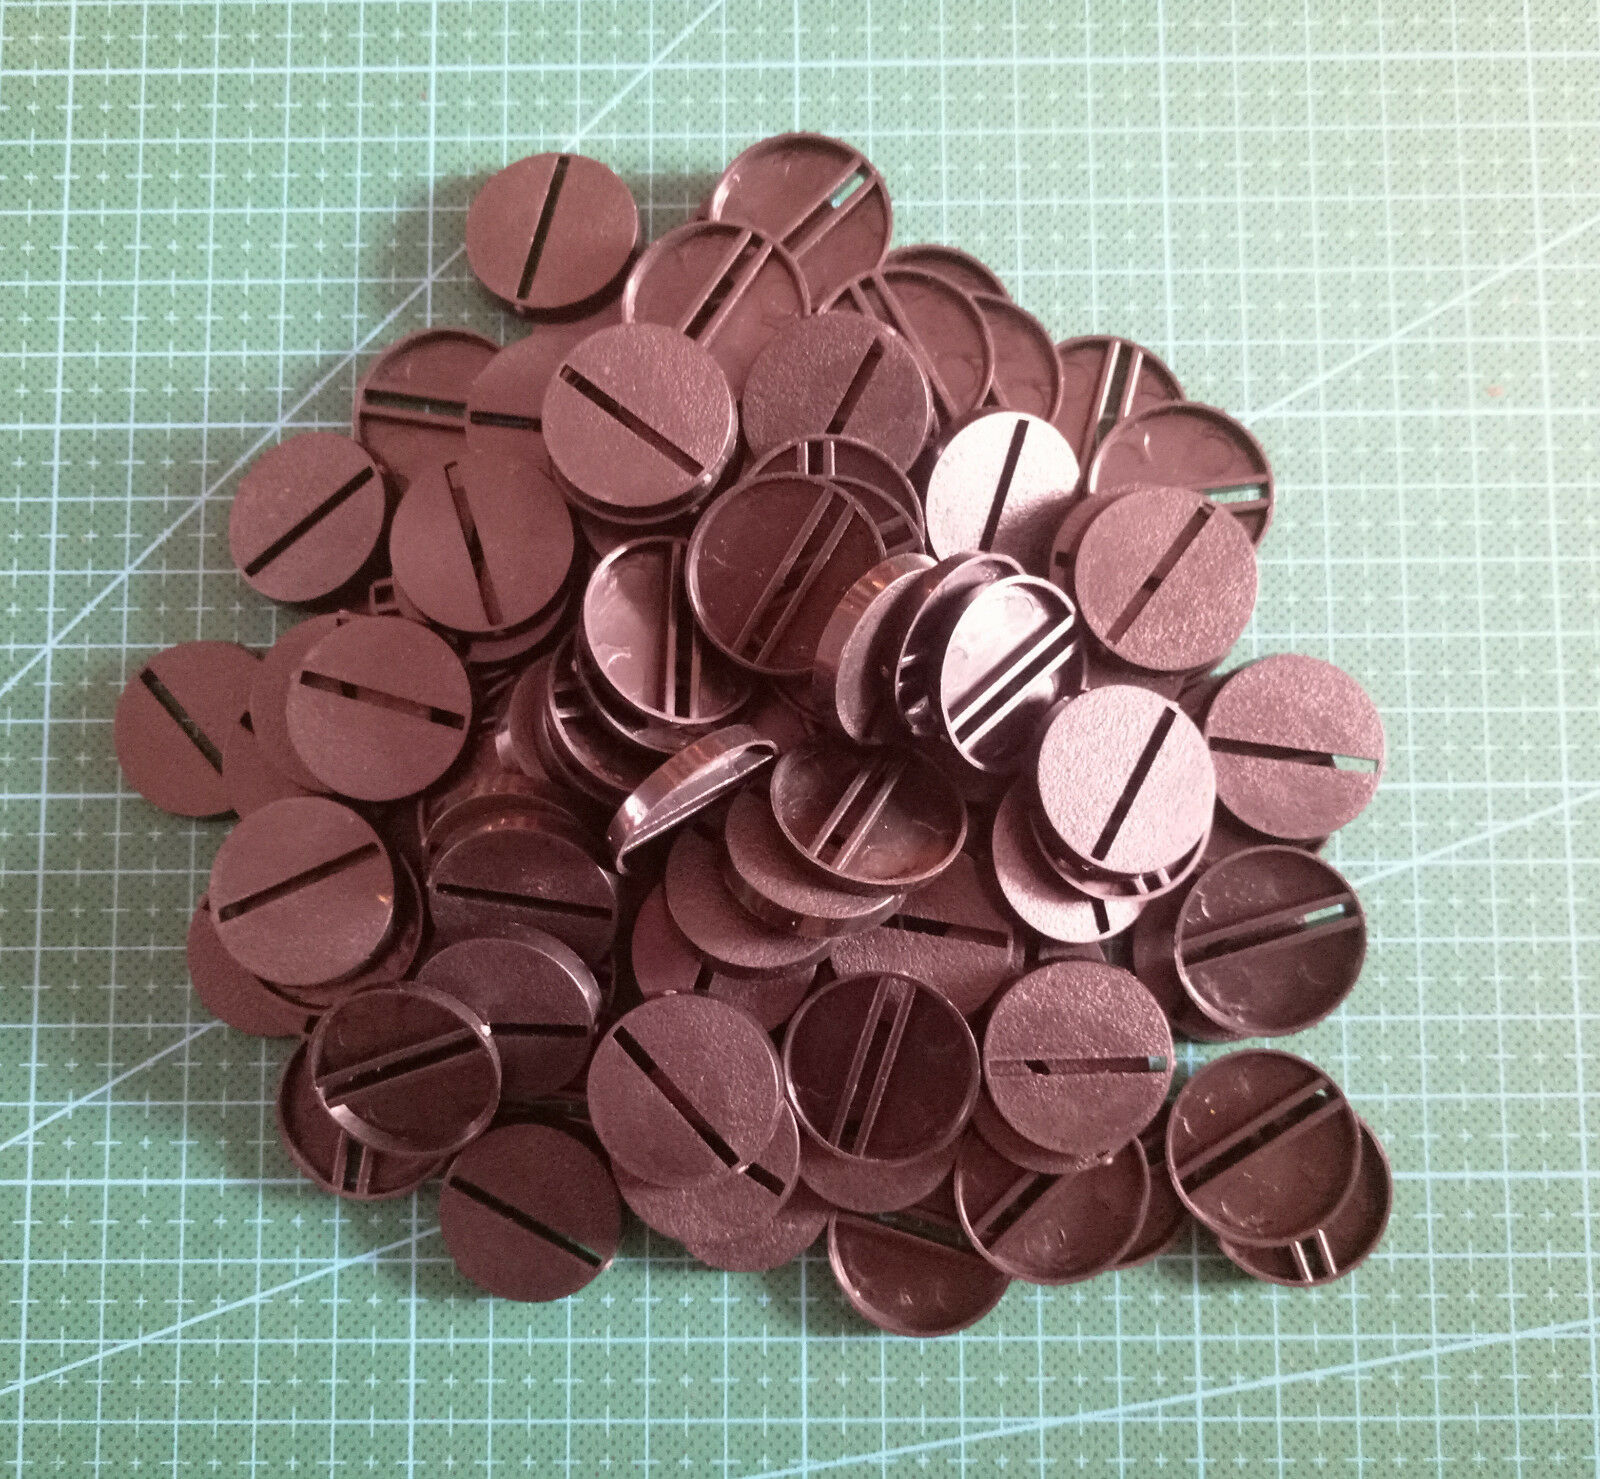 Lot-of-100-25mm-round-slot-bases-for-wargames-table Games